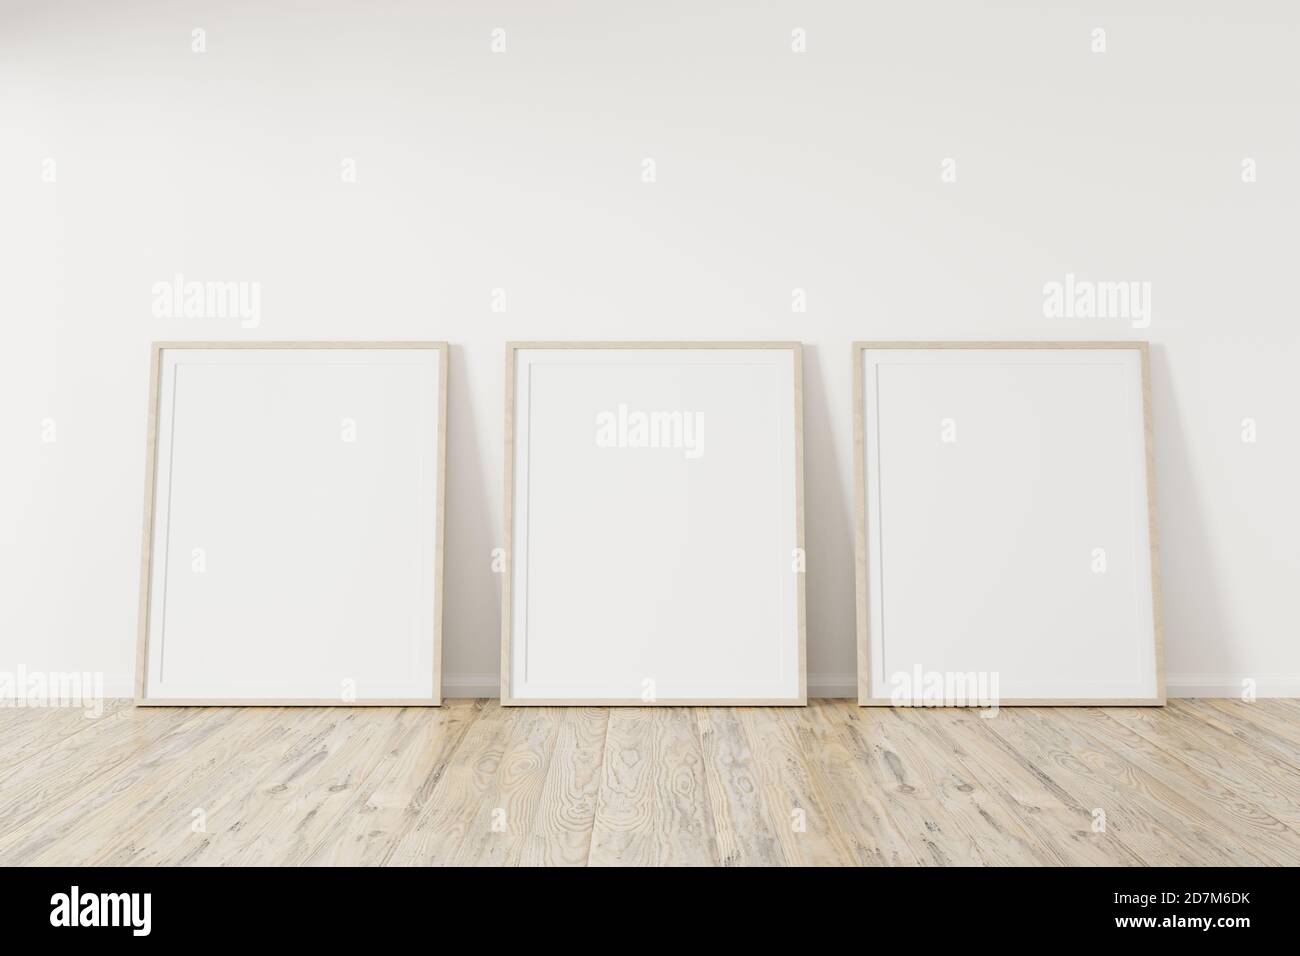 Horizontall wood frame mock up. Wooden frame poster on wooden floor with white wall. Landscape frame 3d illustrations. Stock Photo